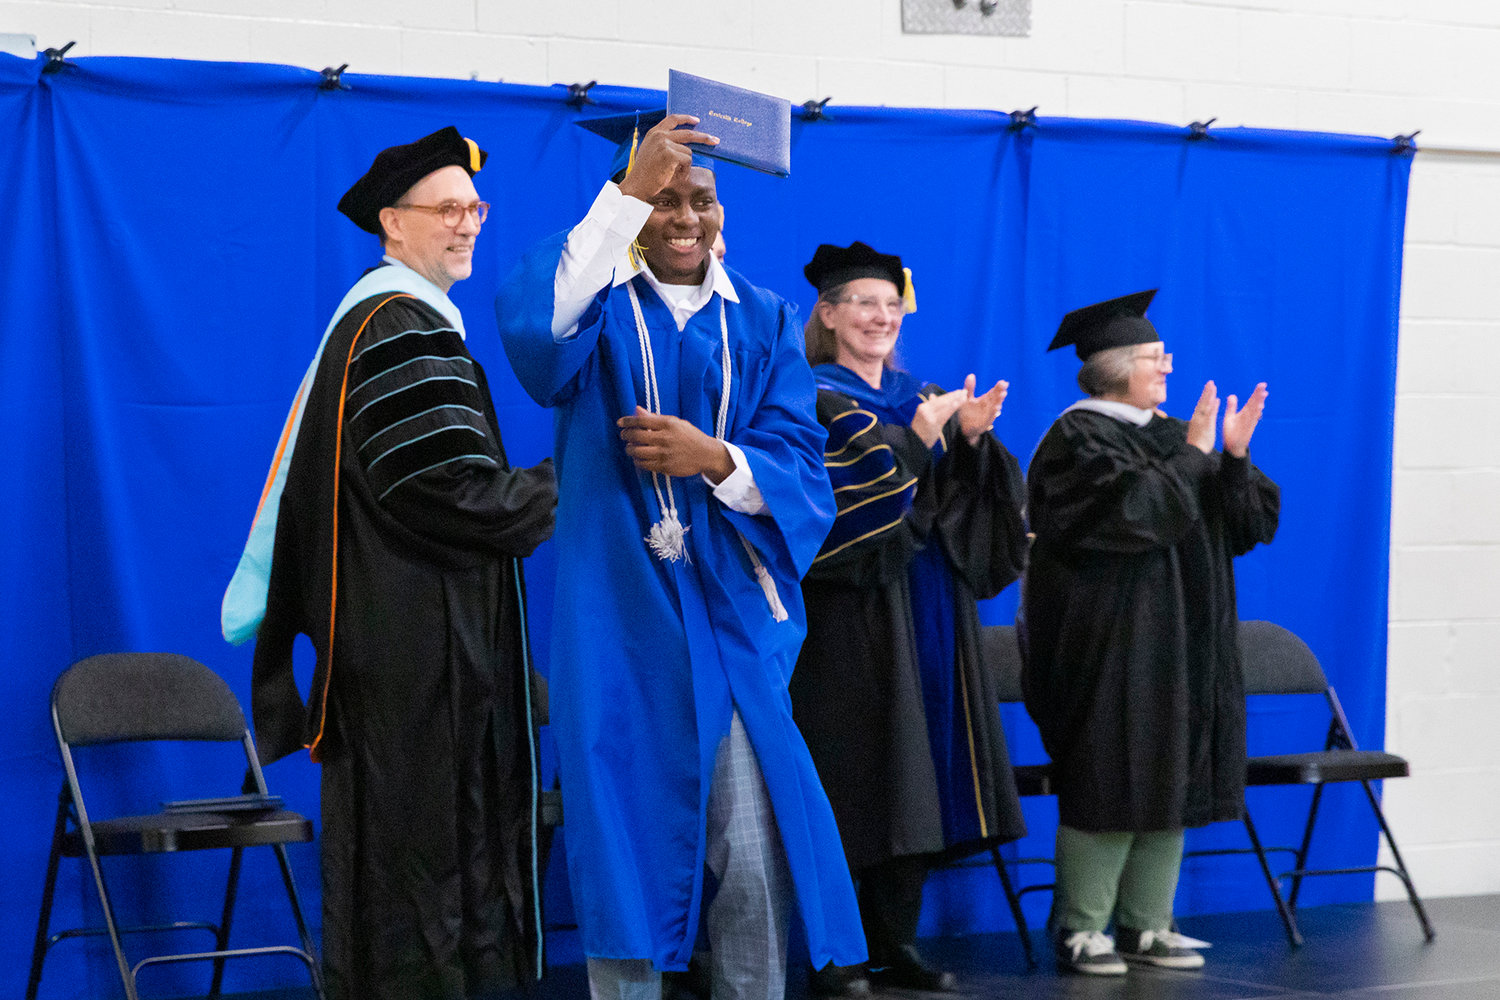 Lakendrick Butts smiles and holds up his diploma while dancing on stage during a graduation ceremony for Centralia College graduates held at the Green Hill School on Wednesday in Chehalis.